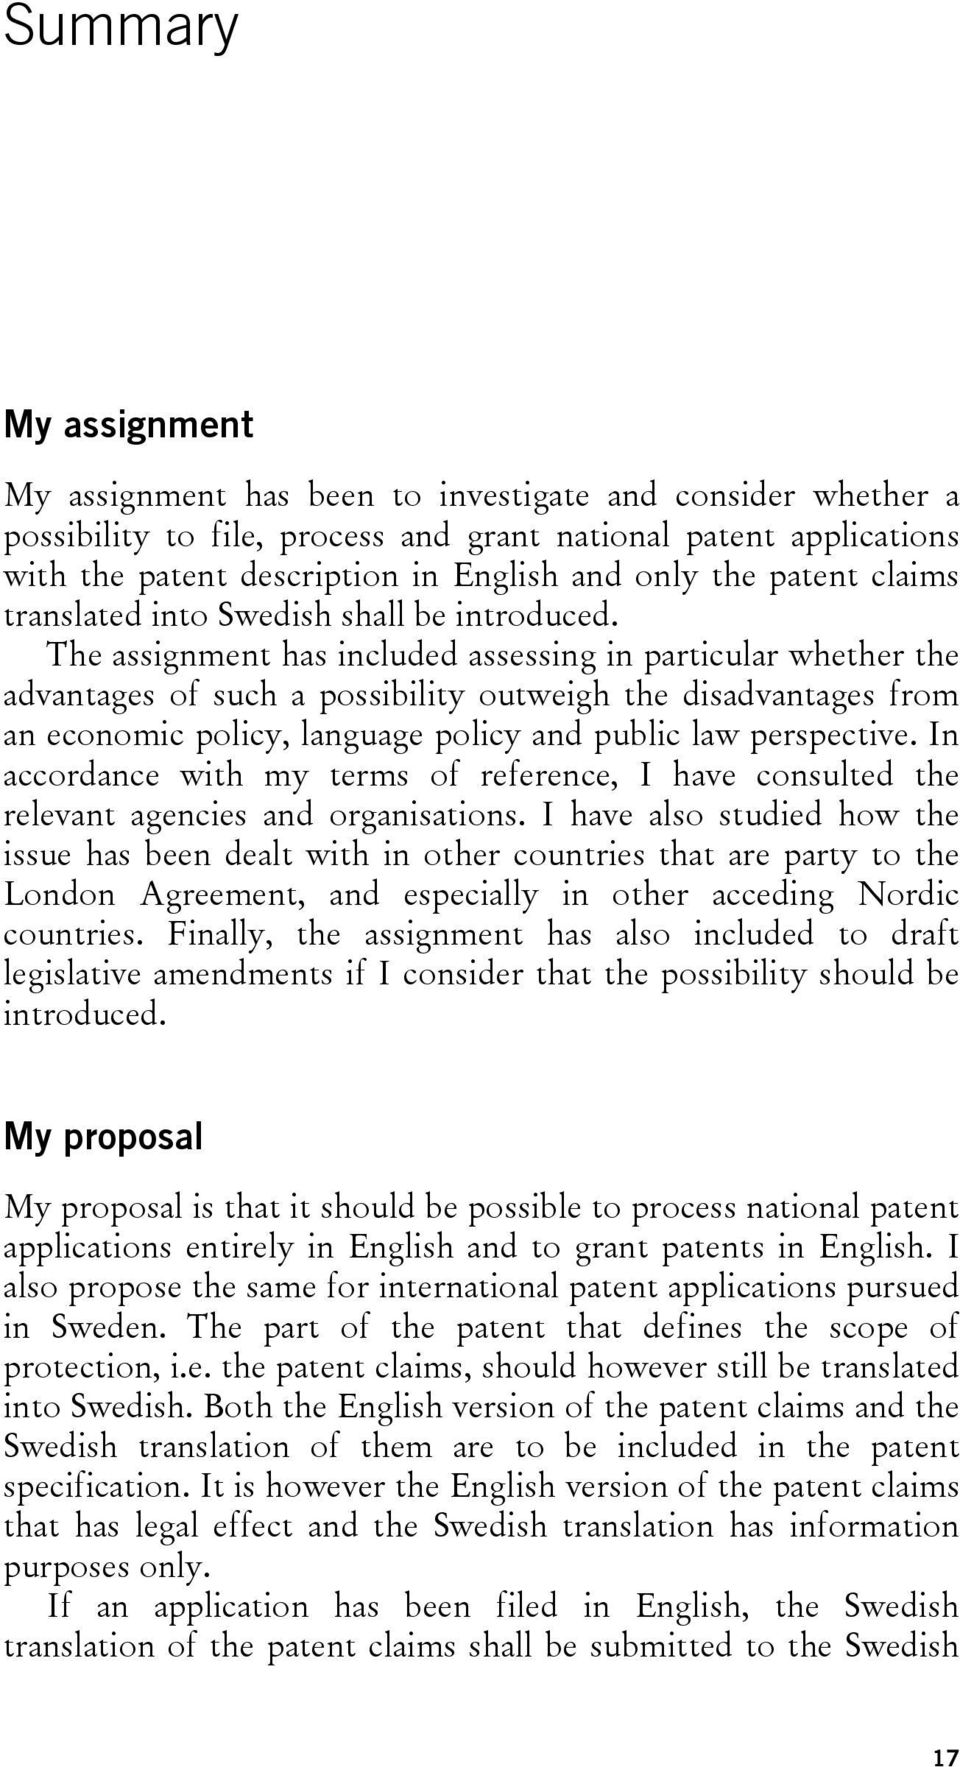 The assignment has included assessing in particular whether the advantages of such a possibility outweigh the disadvantages from an economic policy, language policy and public law perspective.